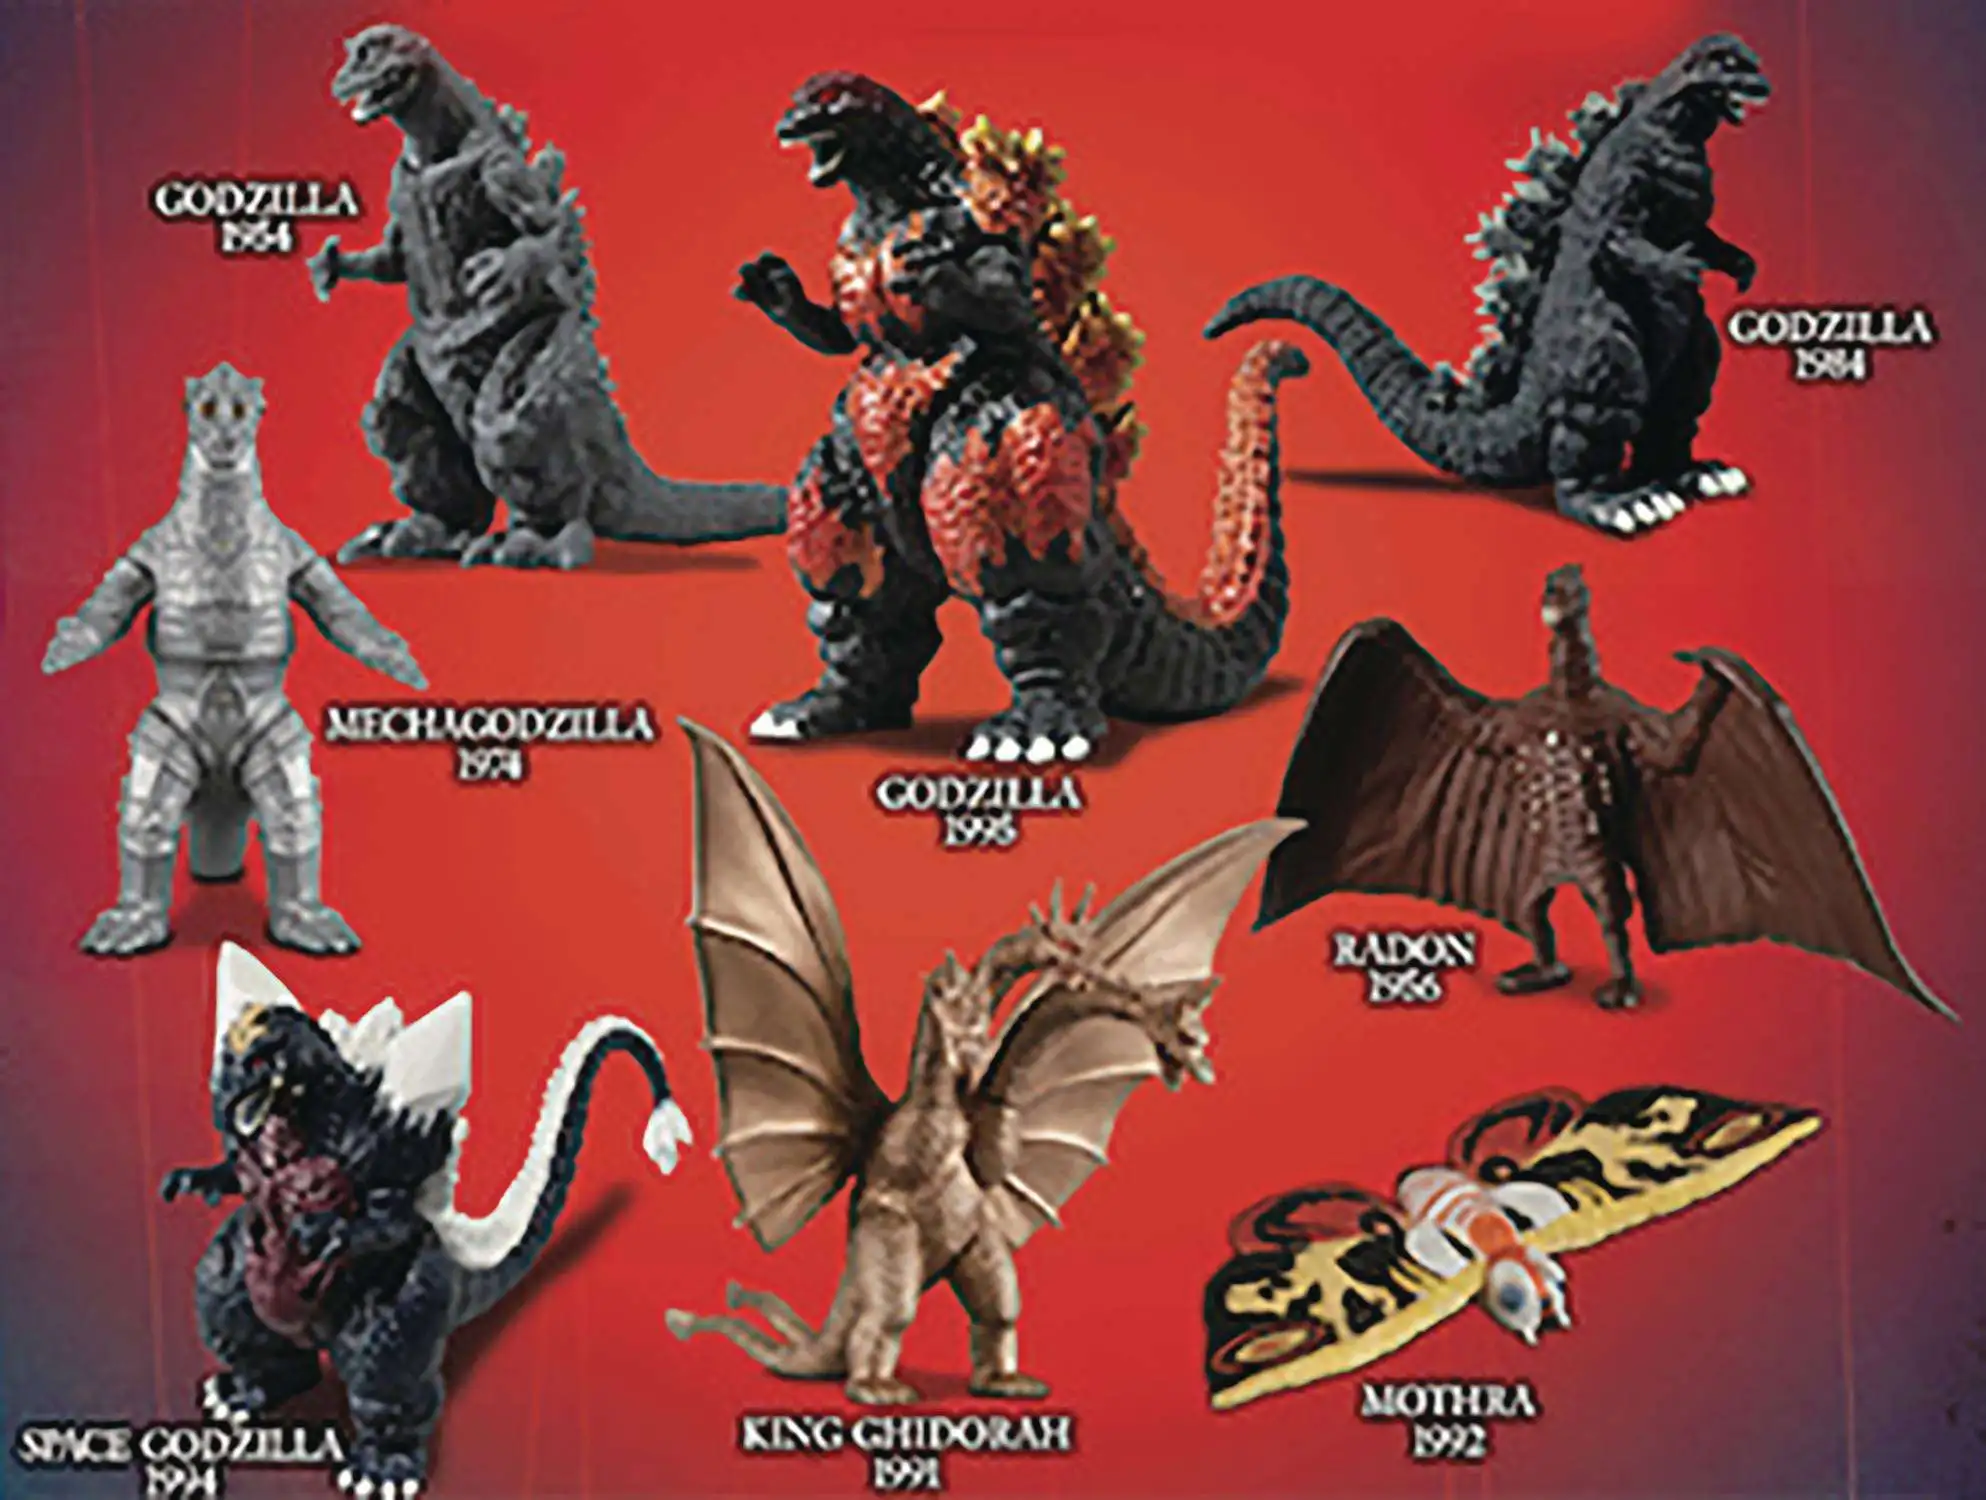 New Bandai GODZILLA Blind Bags! LITTLE BUDDY scale miniatures OPEN &REVIEW!  